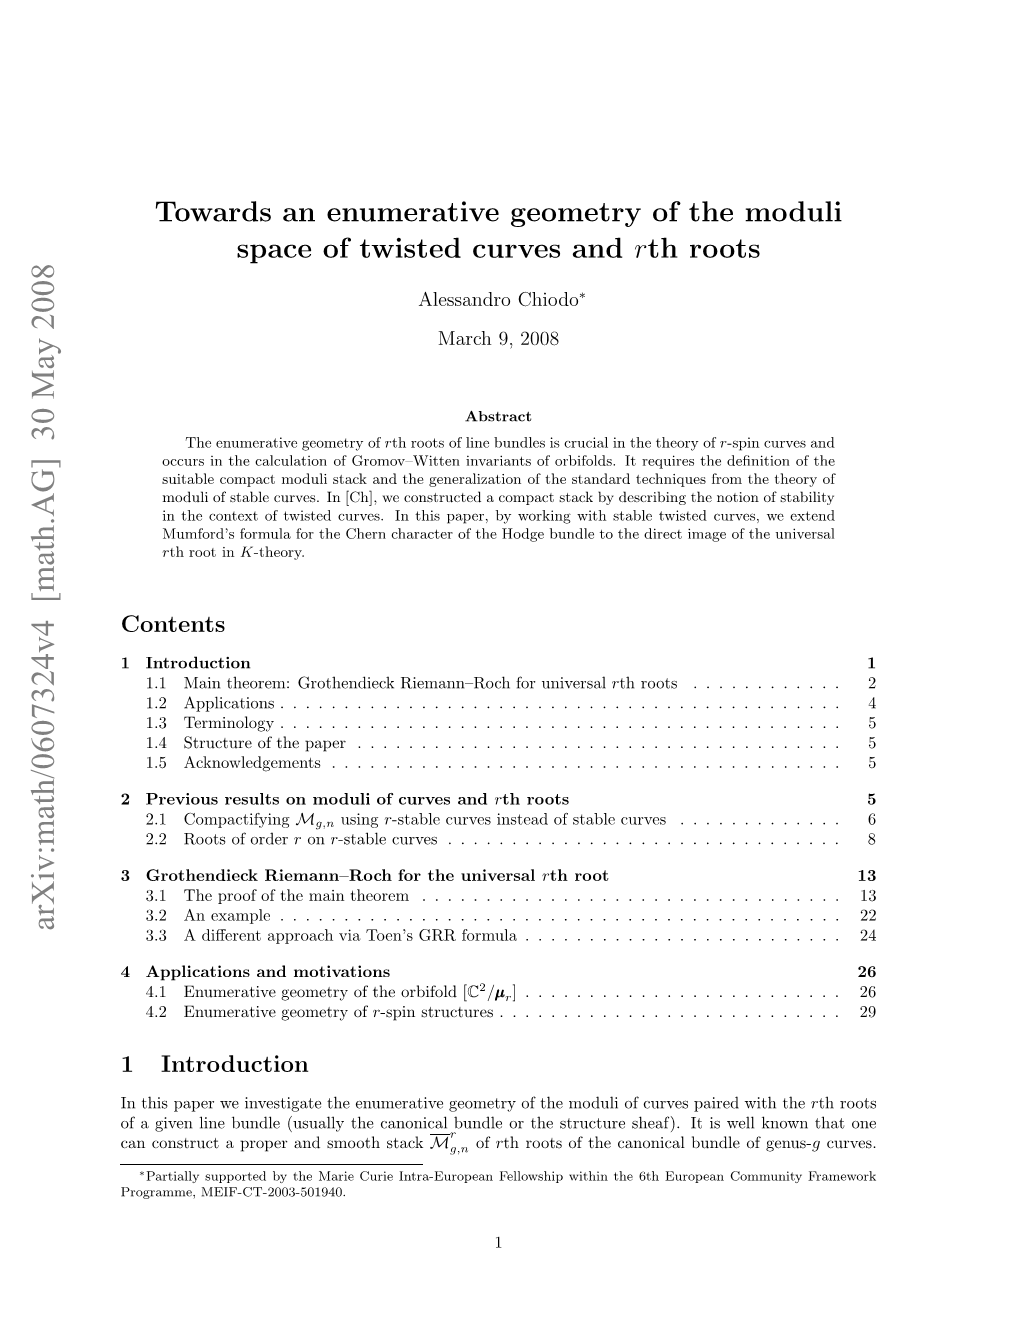 Towards an Enumerative Geometry of the Moduli Space of Twisted Curves